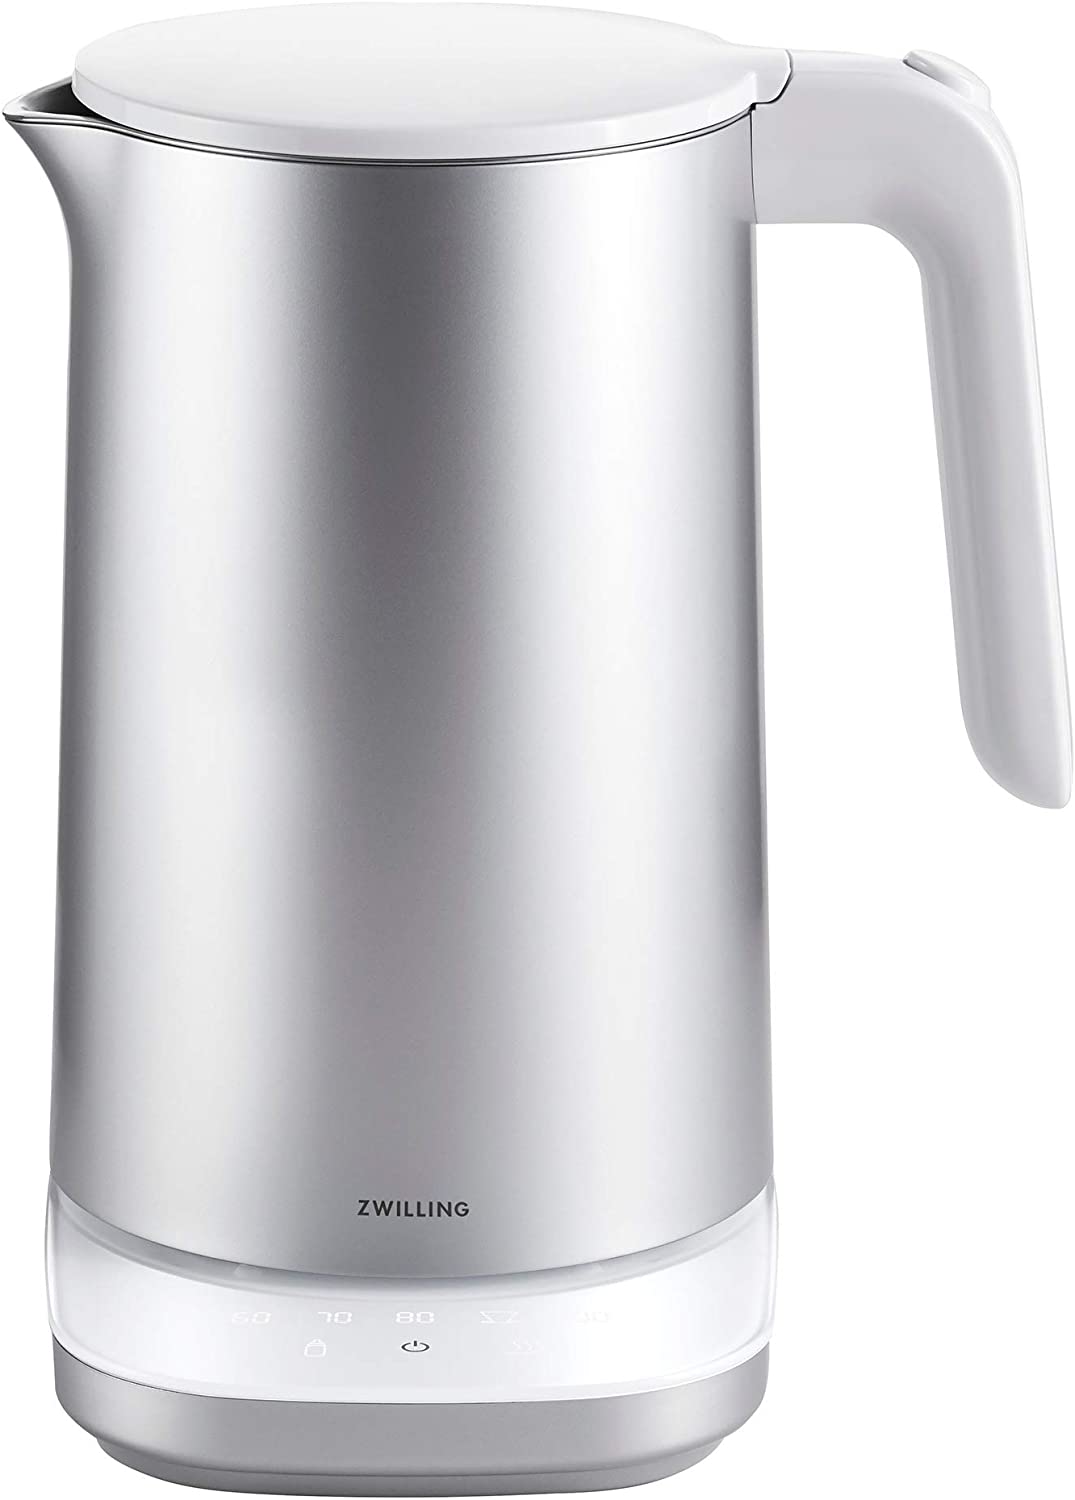 ZWILLING Cool Touch Stainless Steel Electric Kettle 